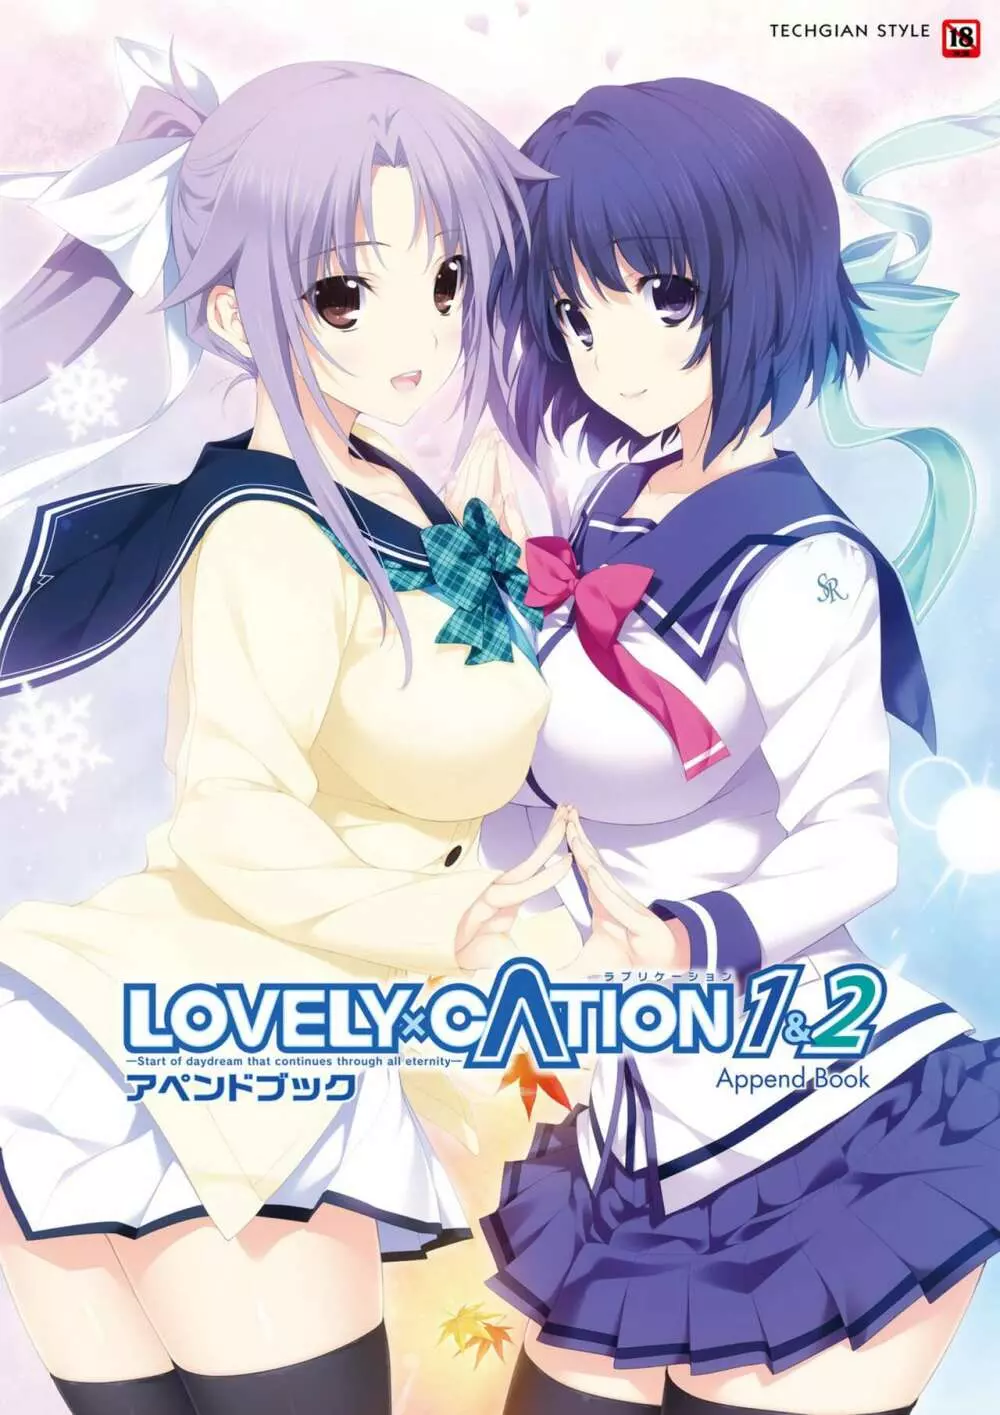 LOVELY×CATION1&2 アペンドブック Page.1